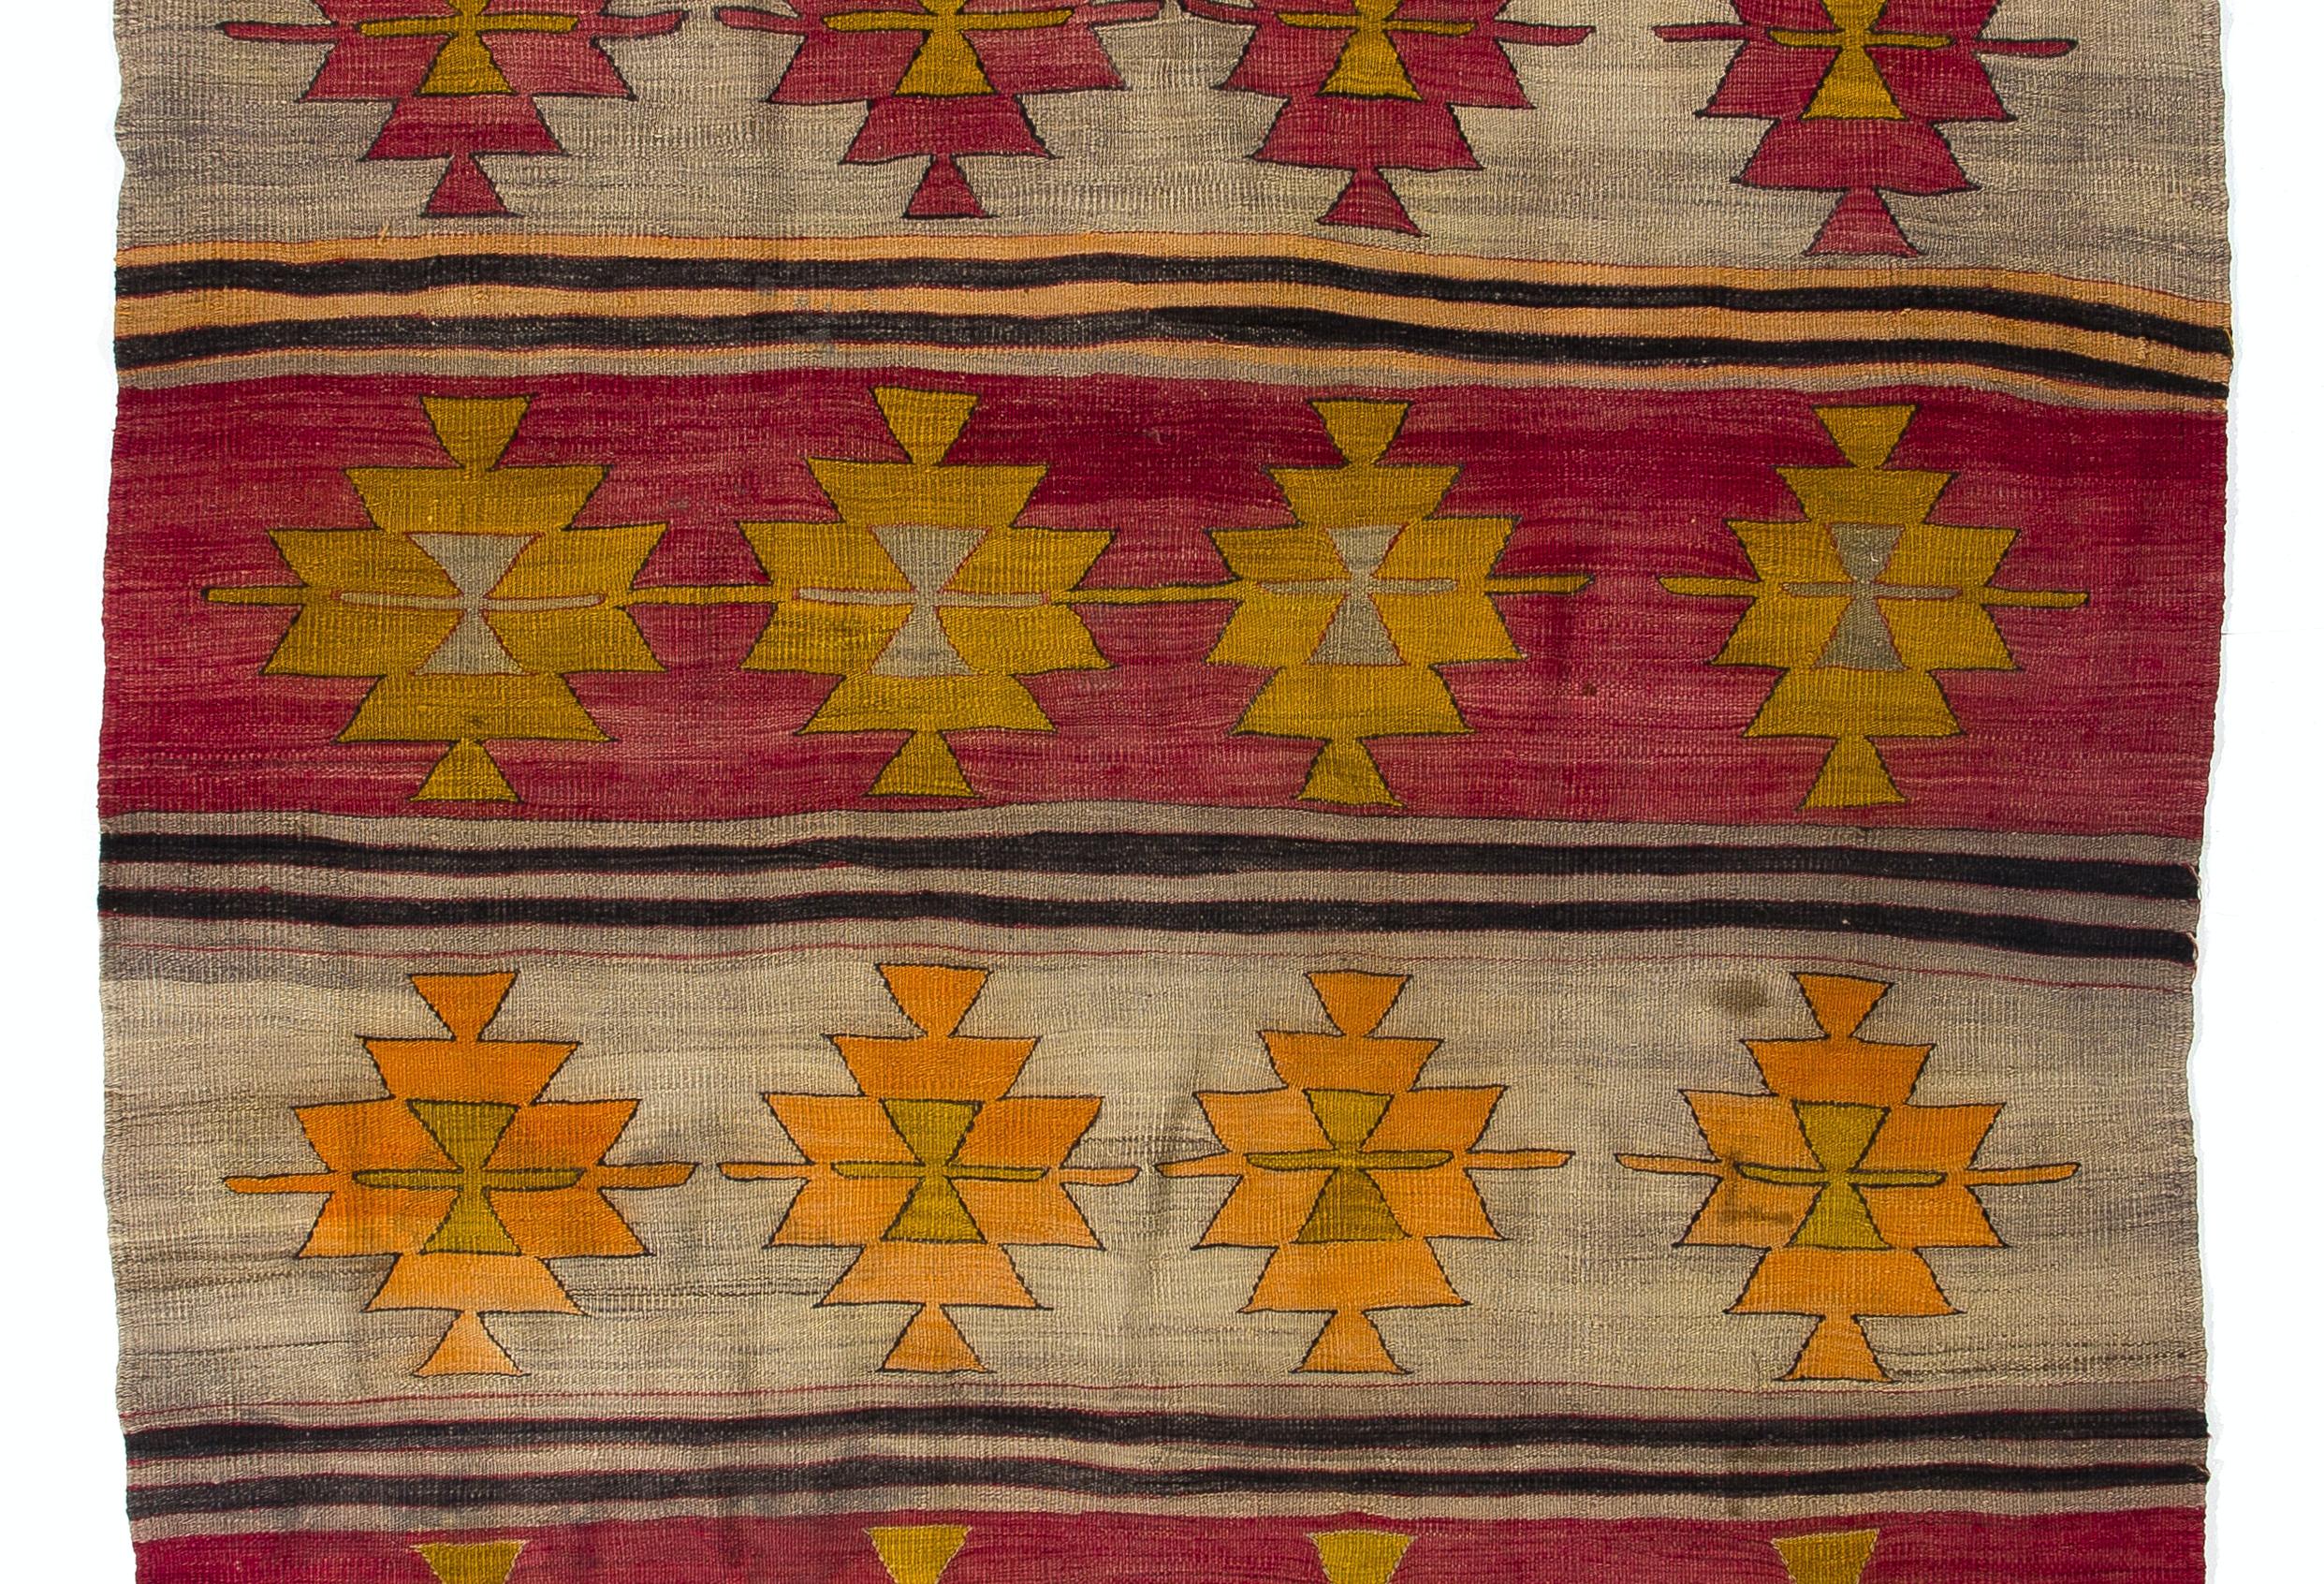 This authentic handwoven flat-weave (Kilim) from Central Turkey was made by Nomads to be used as a floor covering in their tents or summer houses around mid 20th century. It is made of multi colored wool. Measures: 4.5 x 11.6 ft.

These vintage